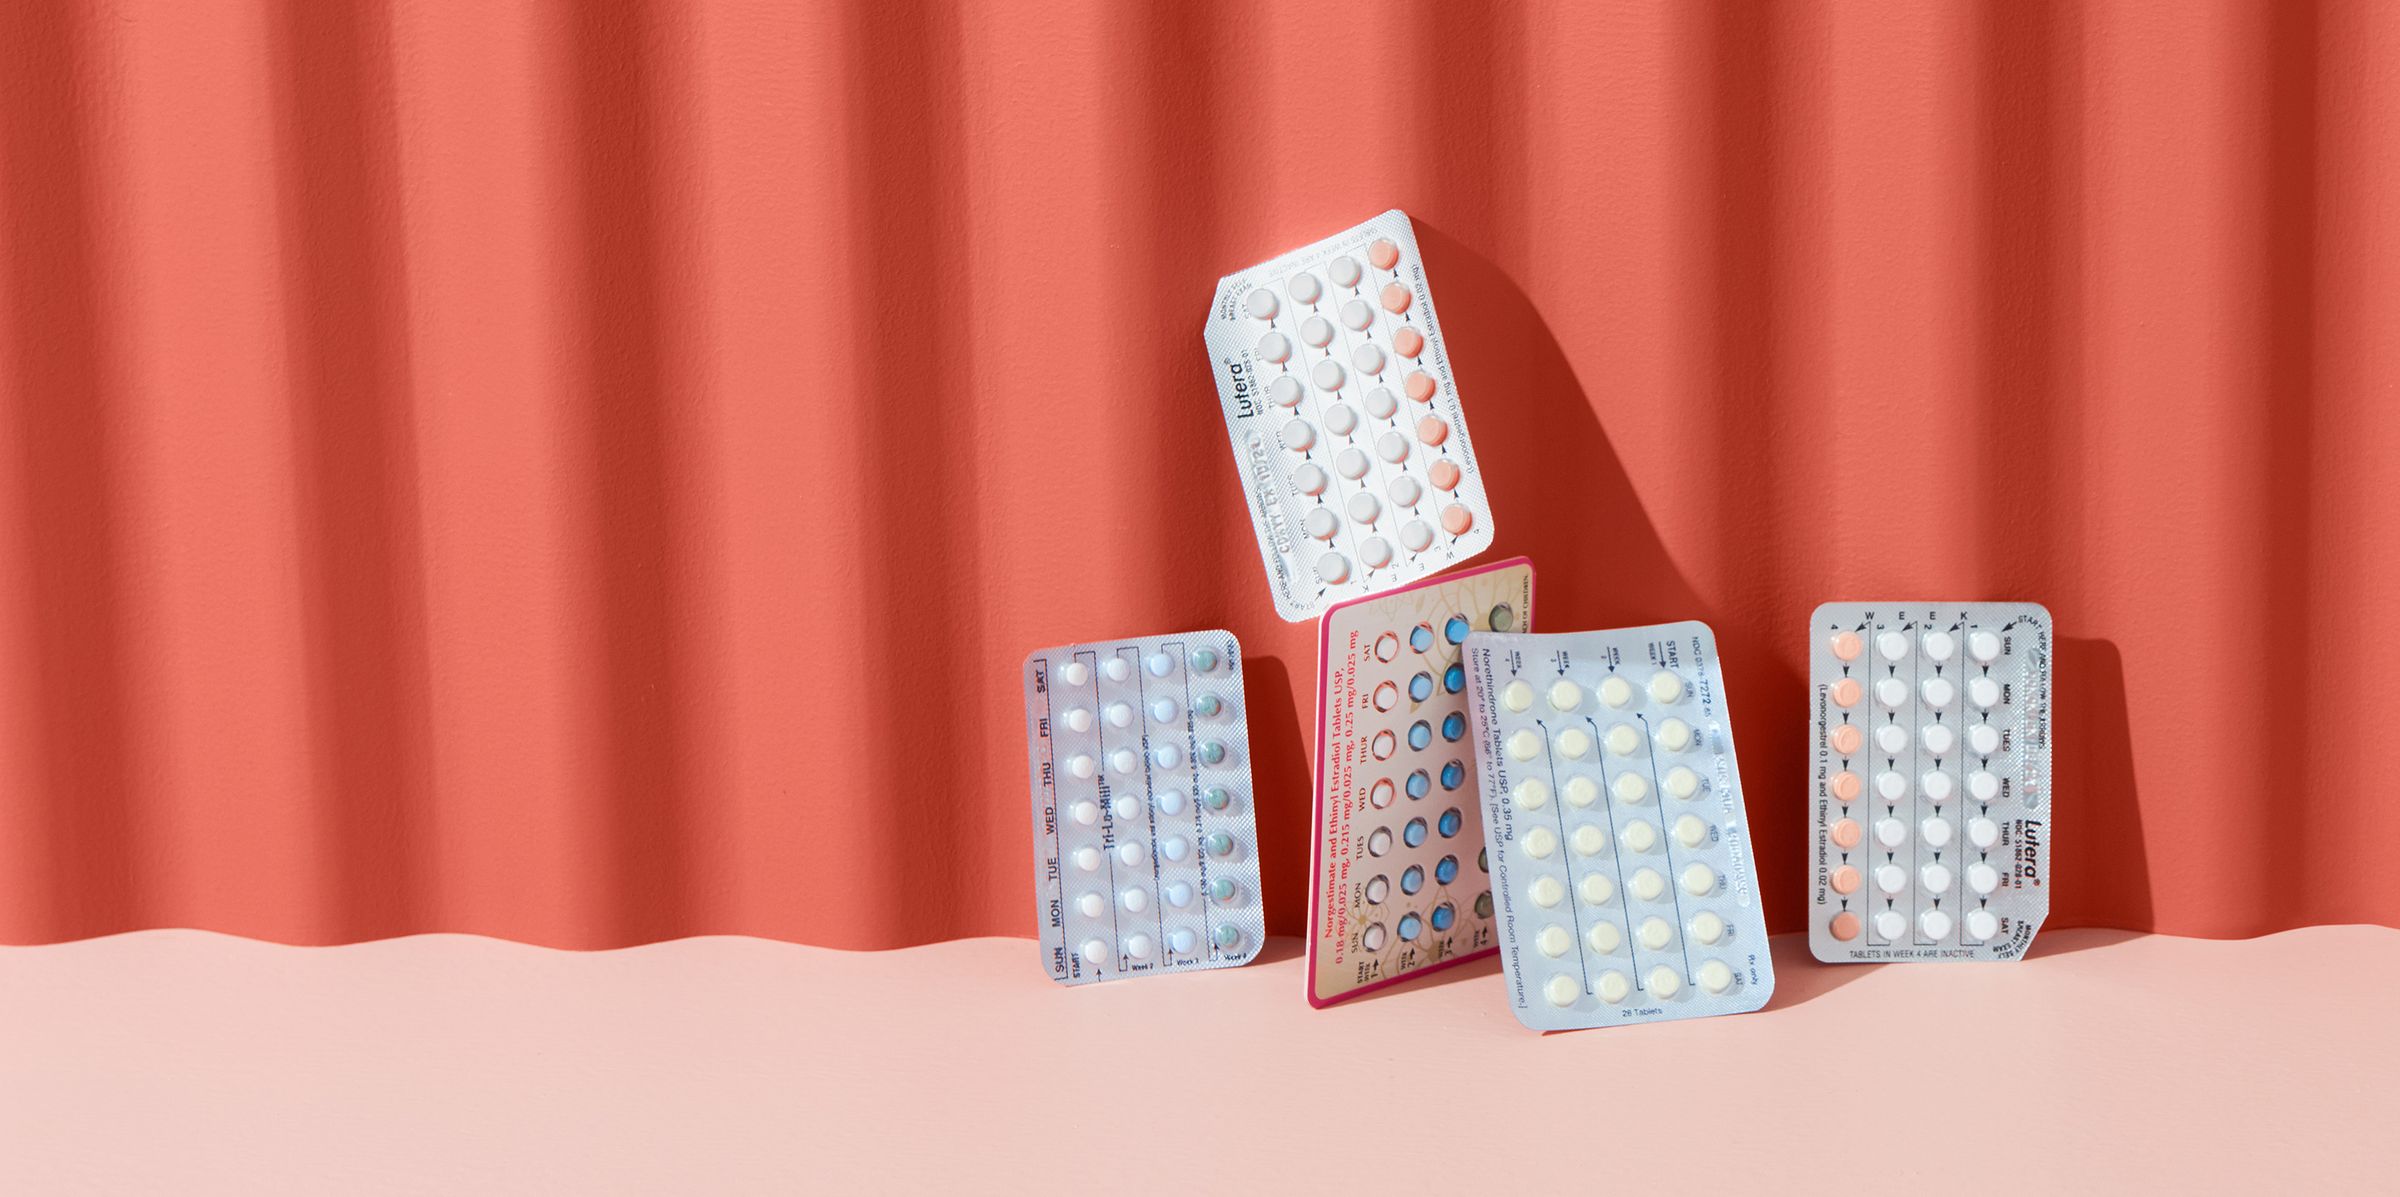 Packs of various birth control pill brands